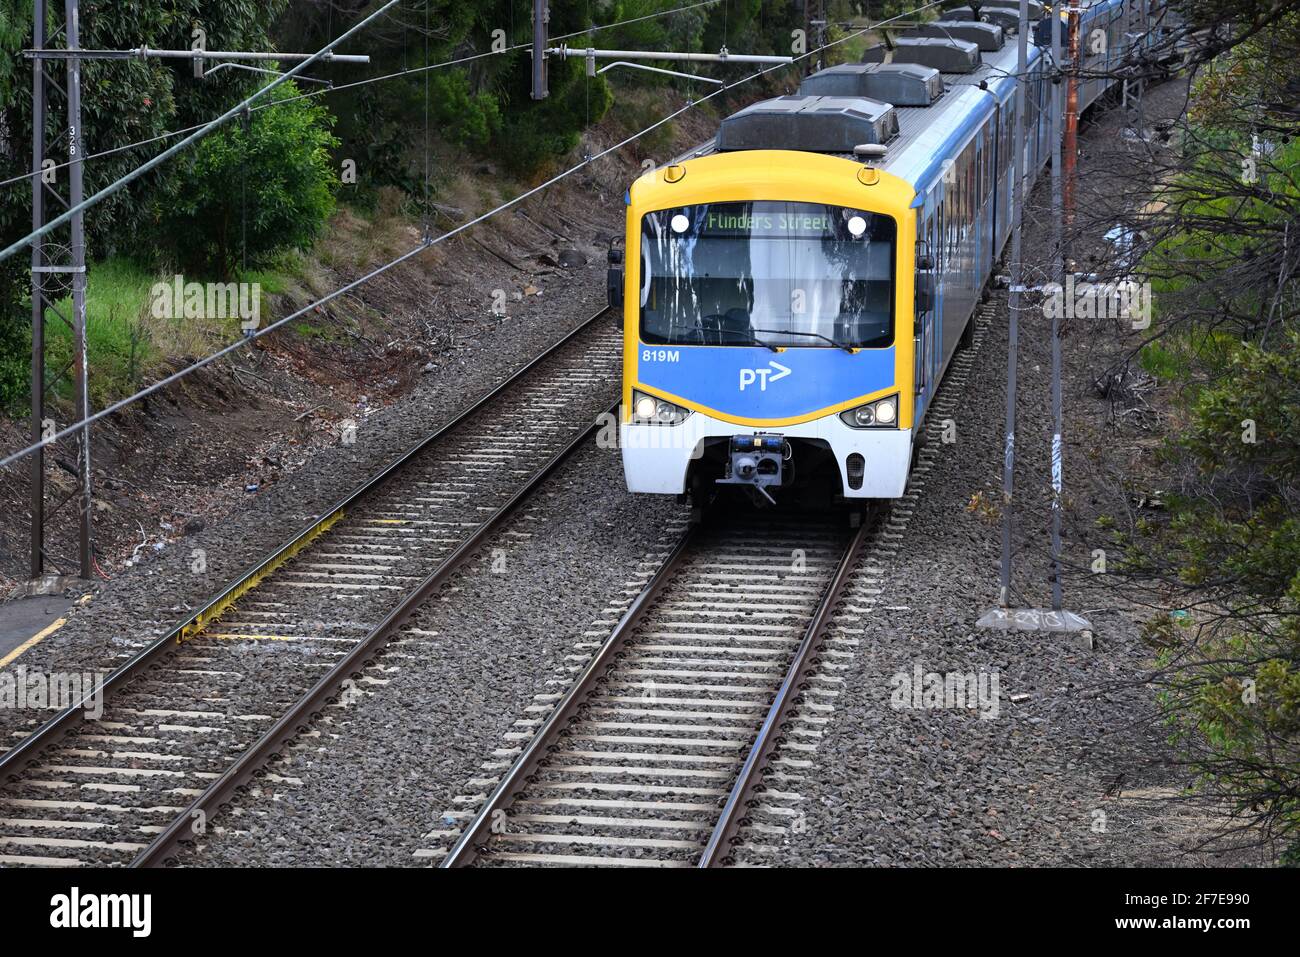 A city-bound Melbourne Metro Trains service on the Sandringham line. The Siemens Nexas train features the latest PTV branding. Stock Photo